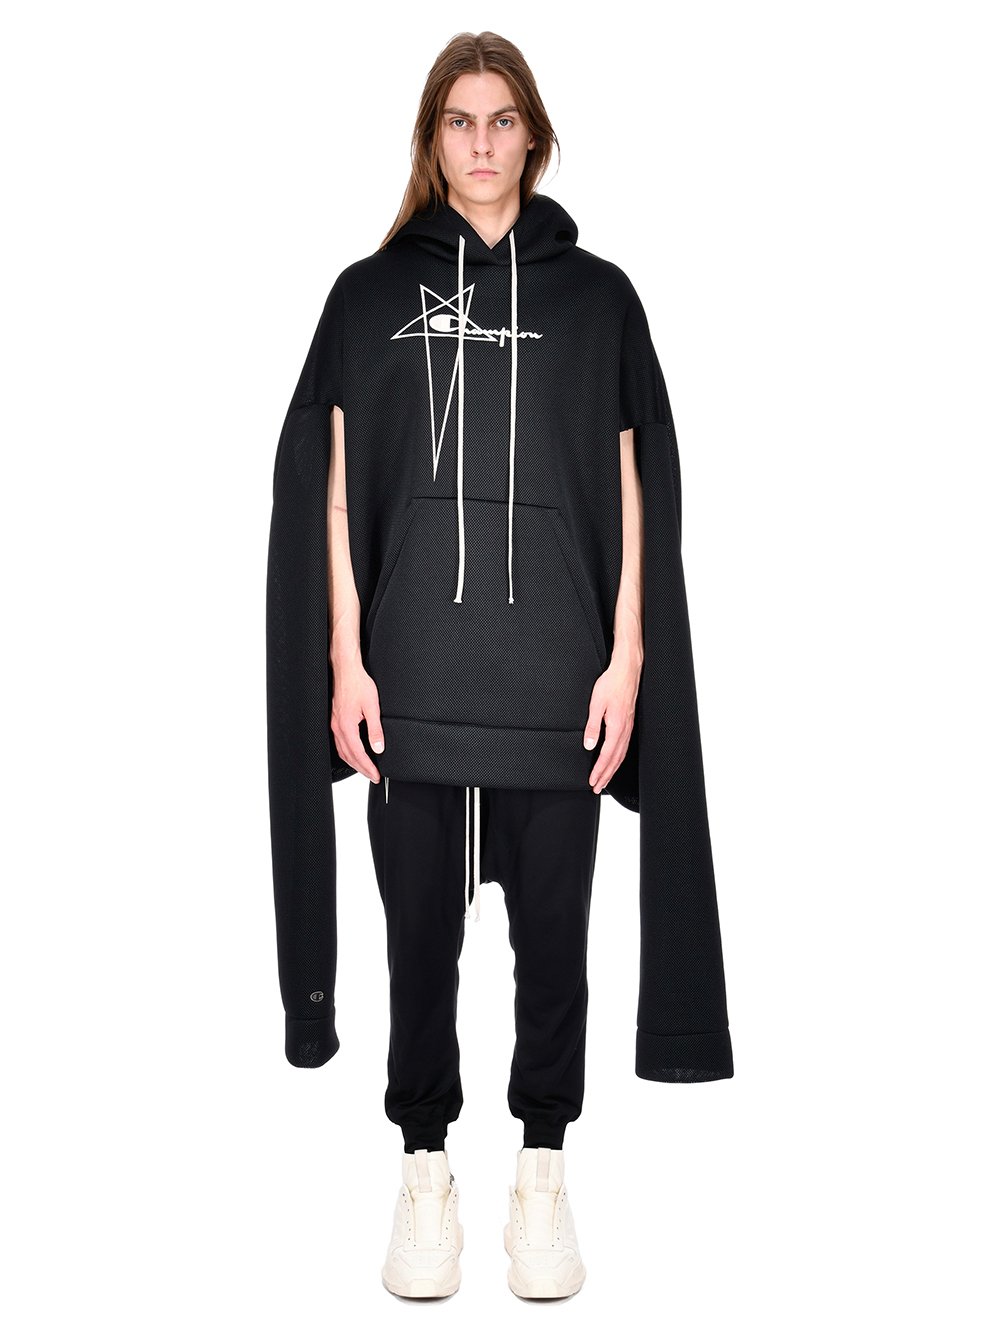 CHAMPION X RICK OWENS FLYPROOF TUNIC IN BLACK RECYCLED 3D MESH